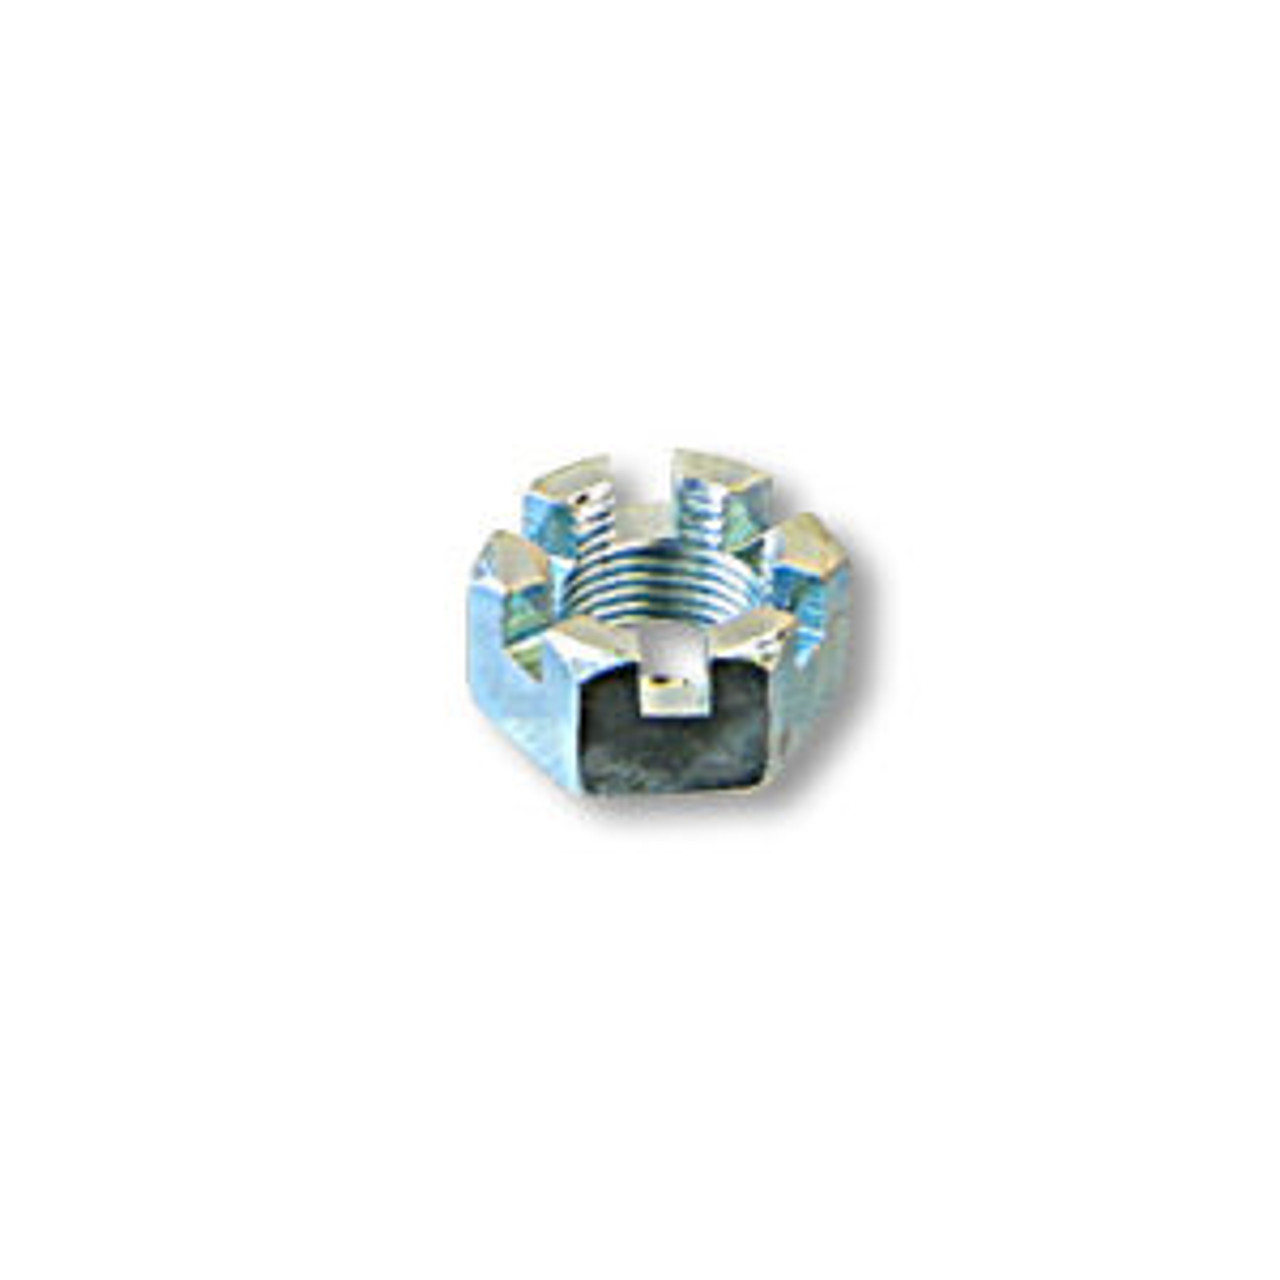 Slotted Hex Nut 5/16-24, Zinc Plated